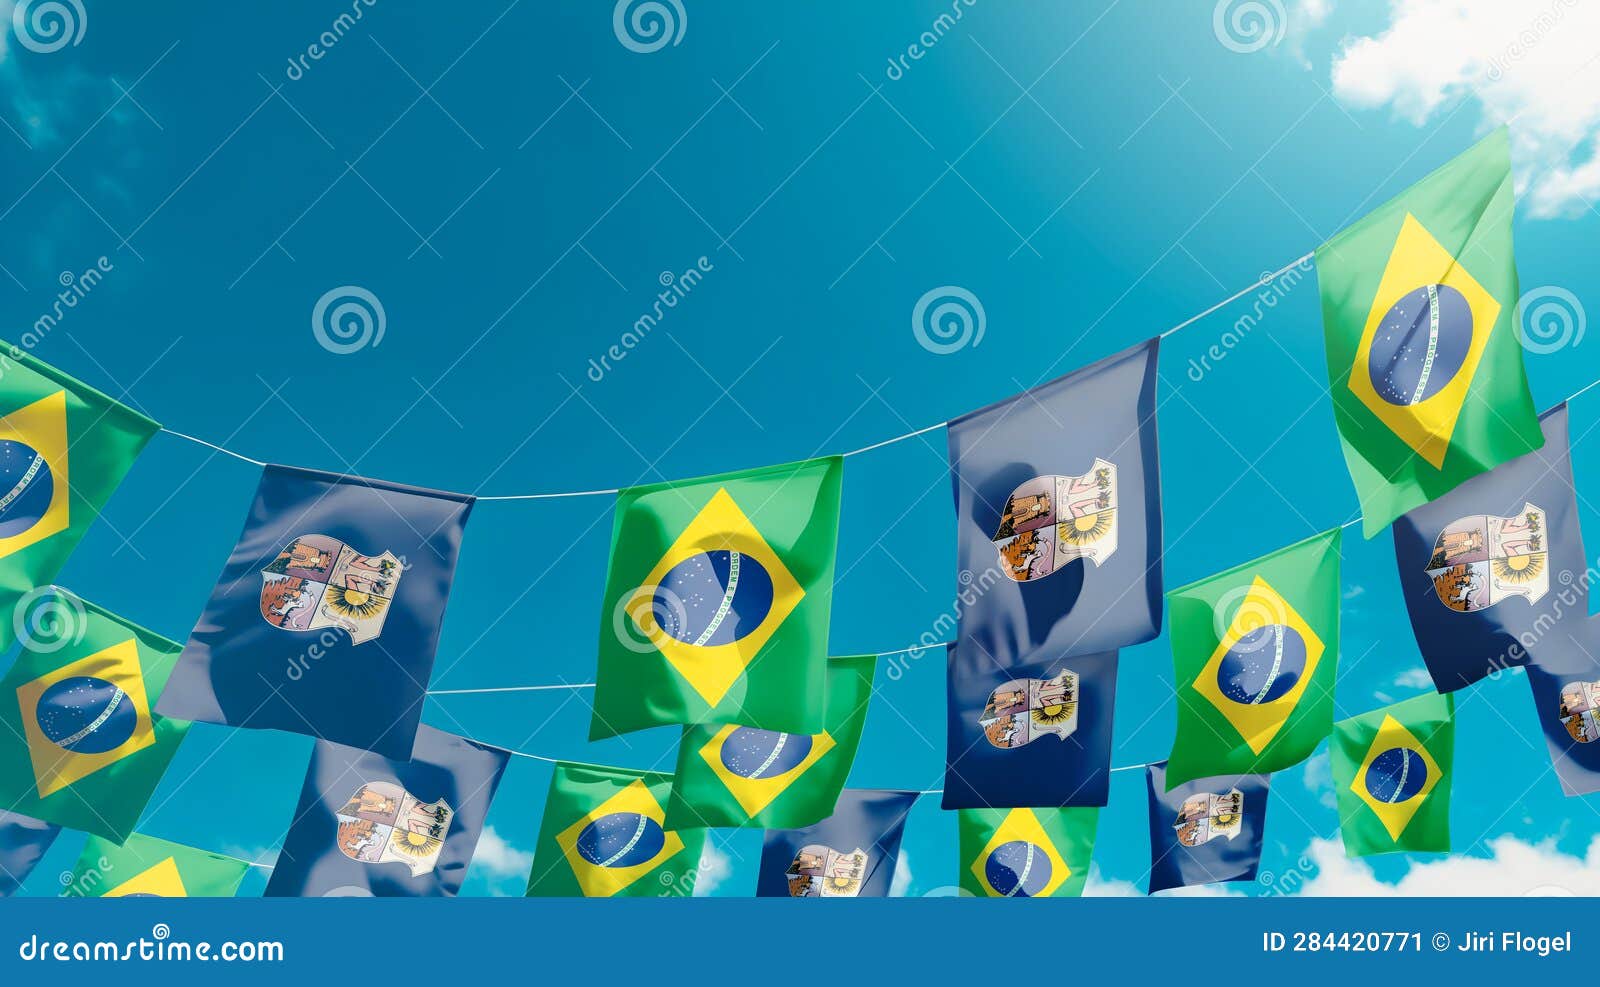 flag of belÃ©m - city of brazil against the sky, flags hanging vertically